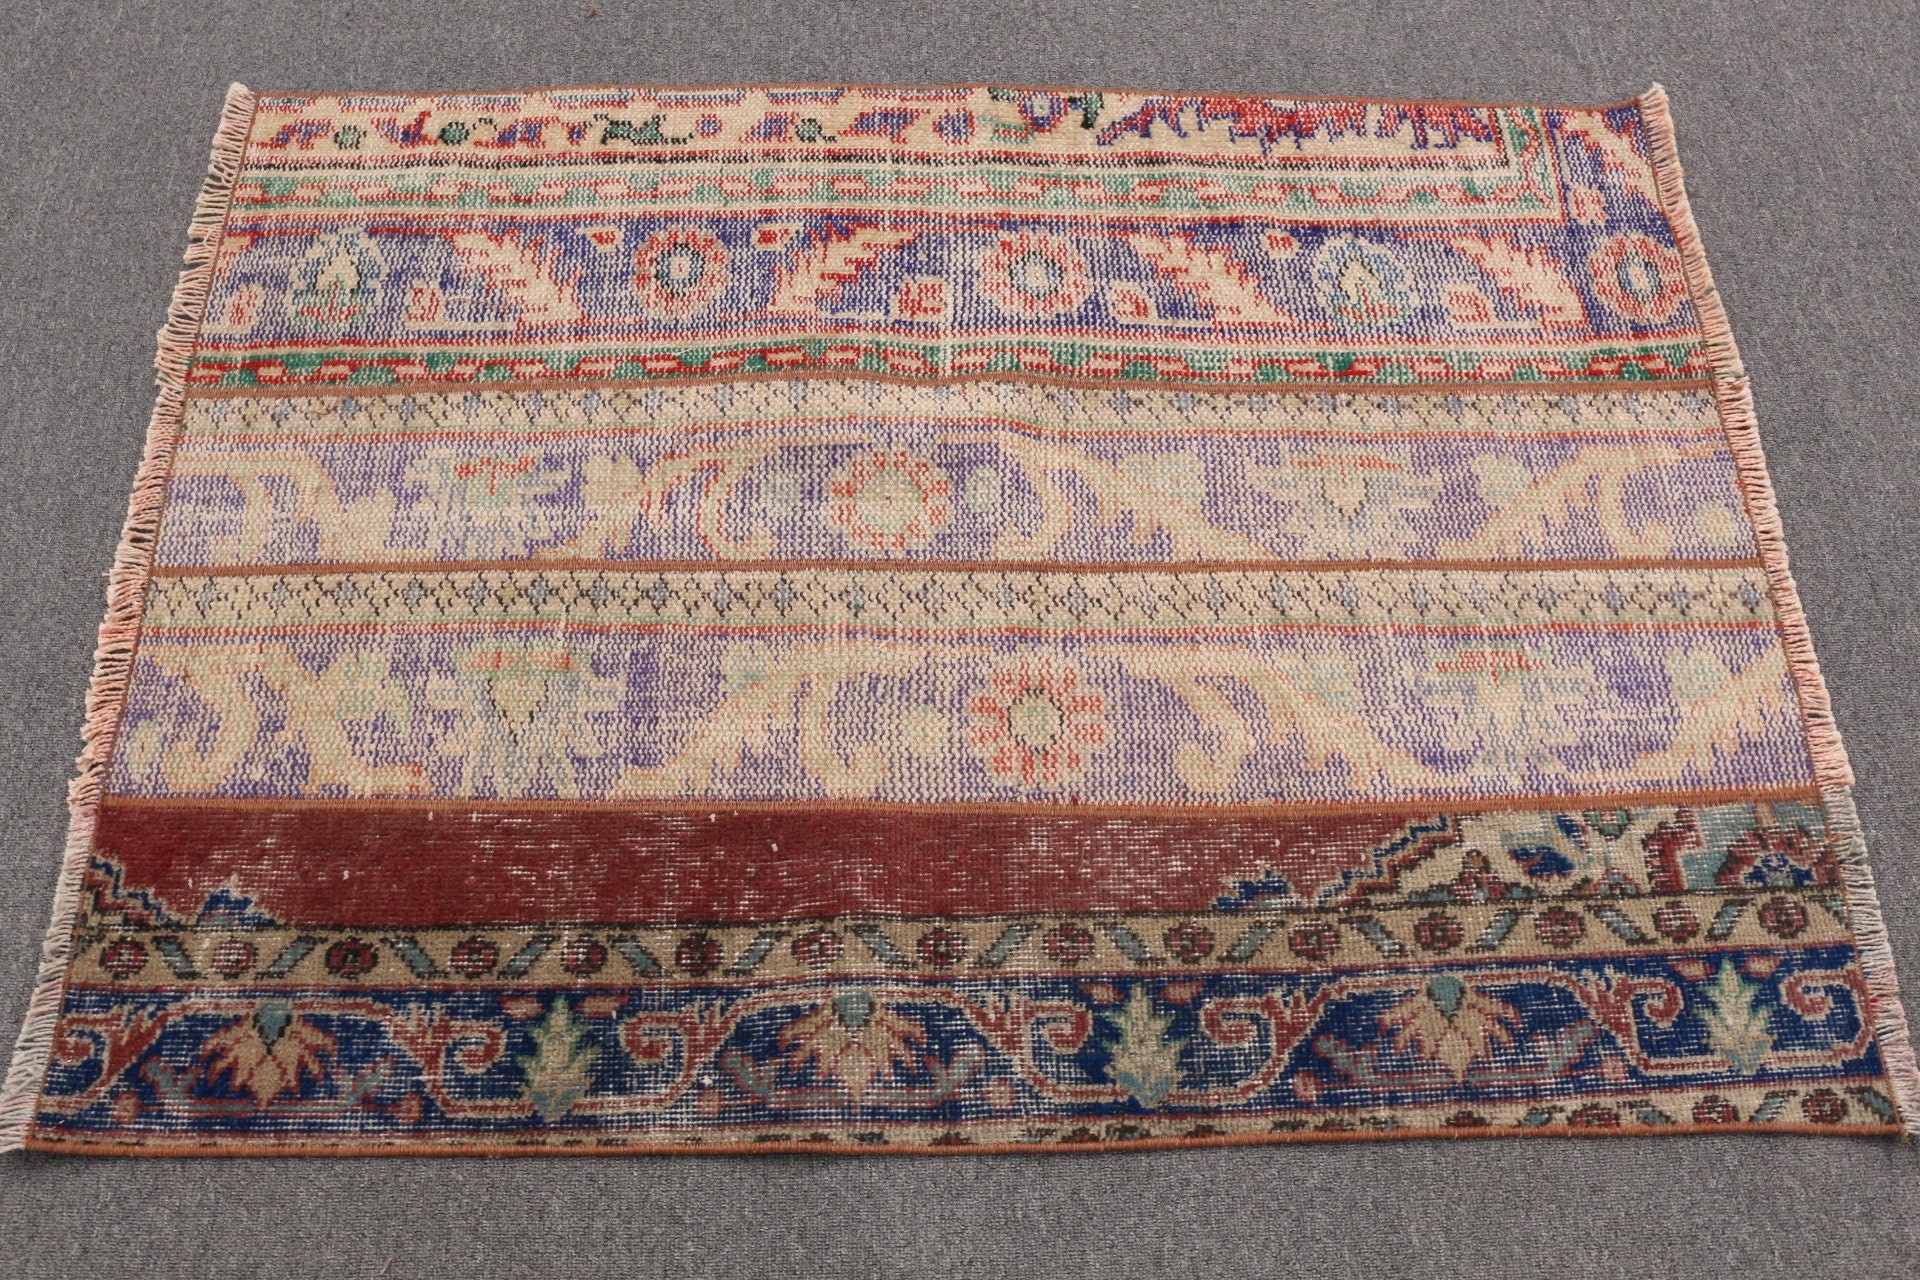 Vintage Rug, Antique Rugs, Outdoor Rugs, Anatolian Rug, Bath Rugs, 3.1x4.2 ft Small Rug, Kitchen Rug, Blue Home Decor Rugs, Turkish Rug